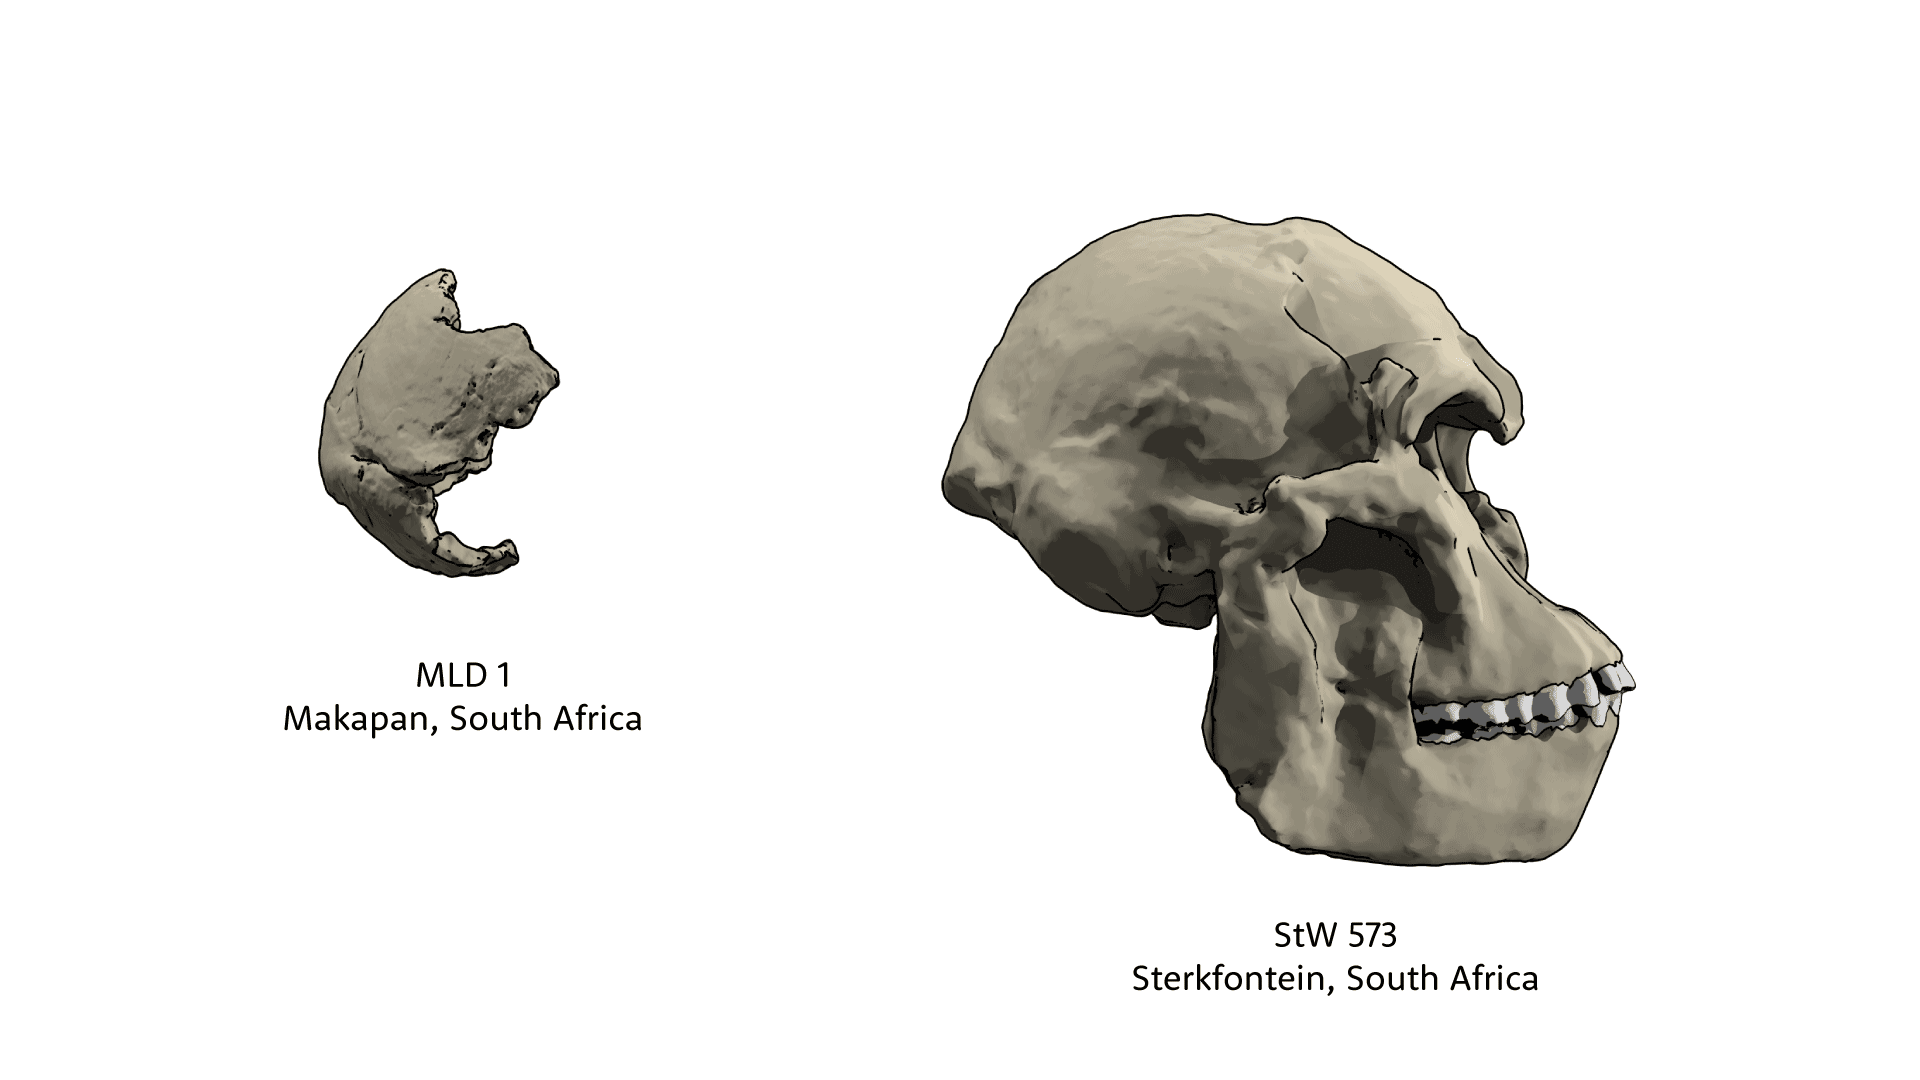 MLD 1 partial skull fragment on left and StW 573 complete skull on right